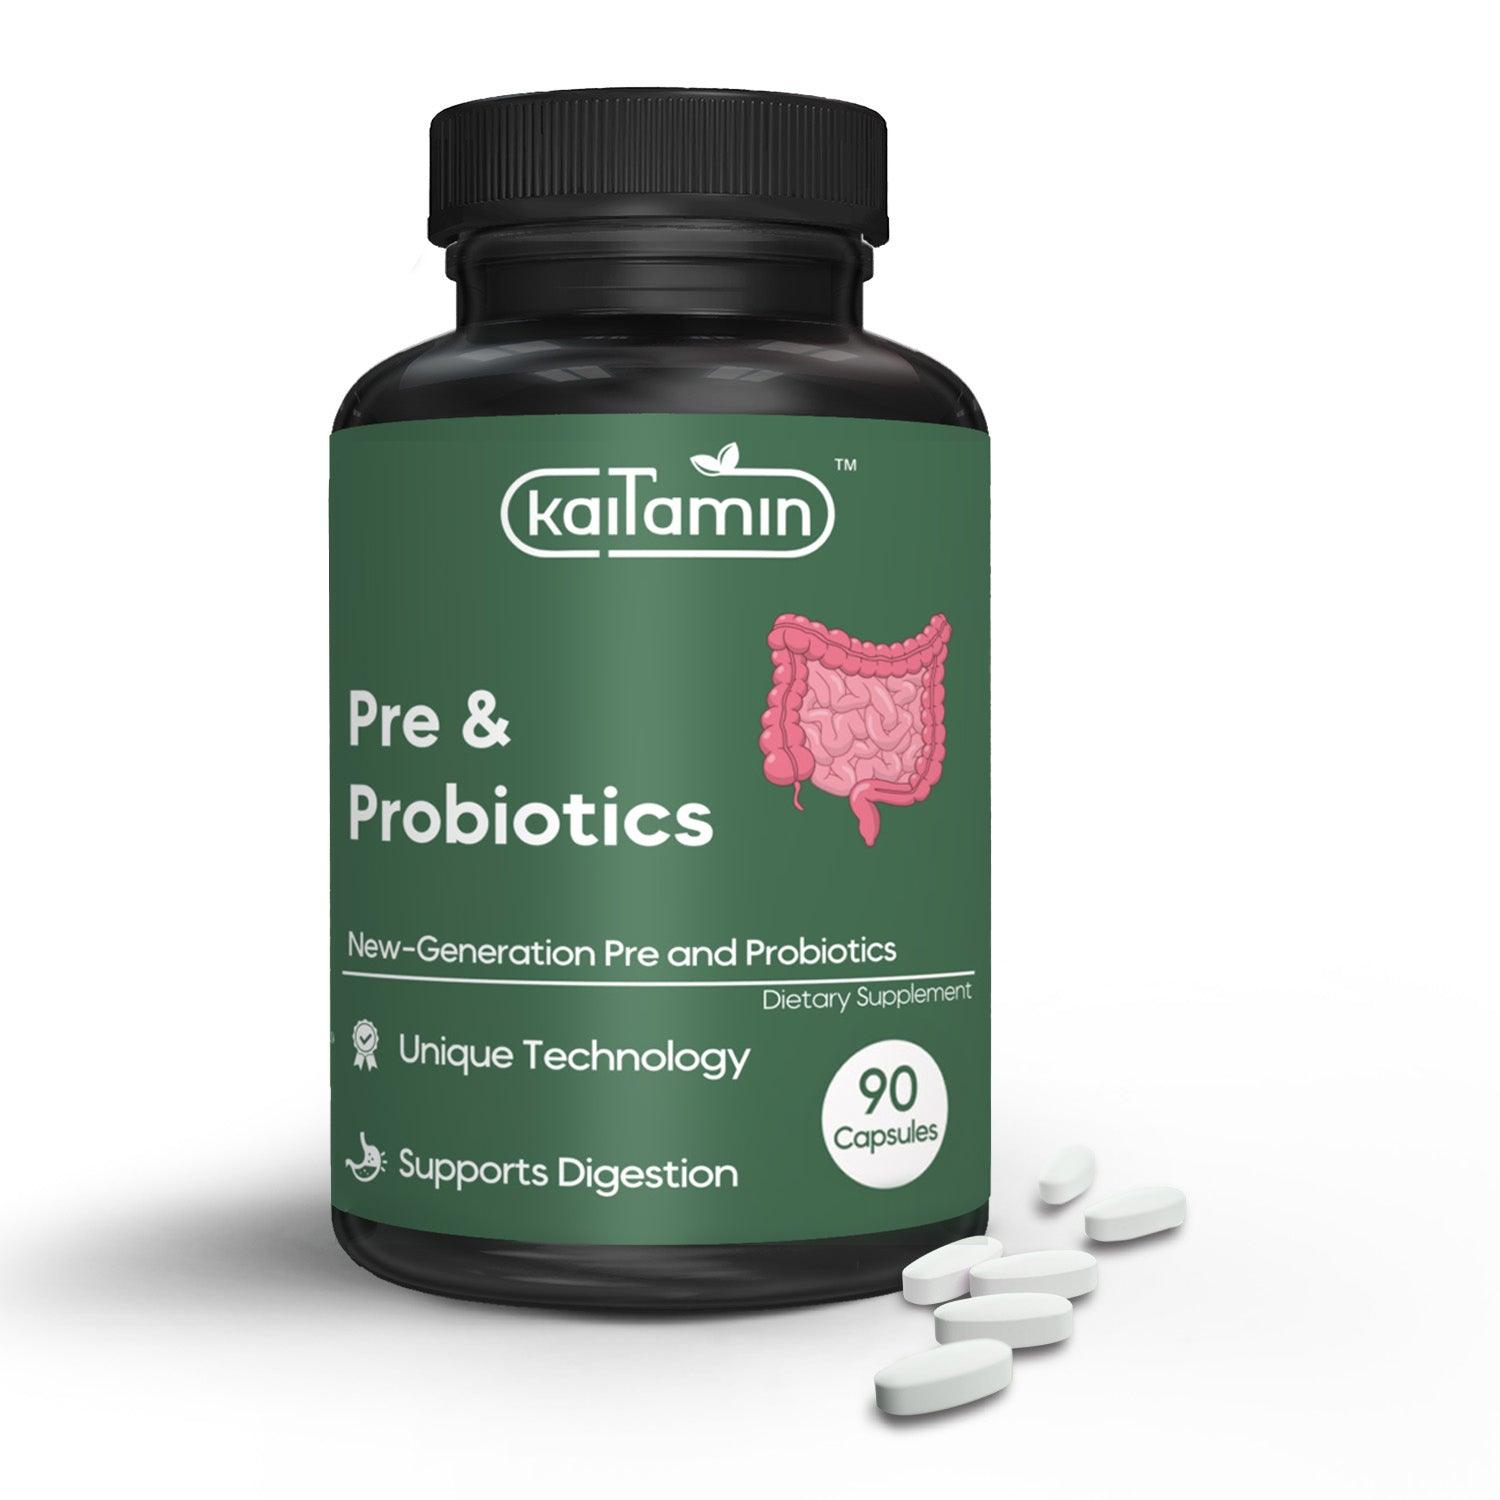 Pre & Probiotics - For Digestion and Immunity - 90 Capsules - Kaitamin